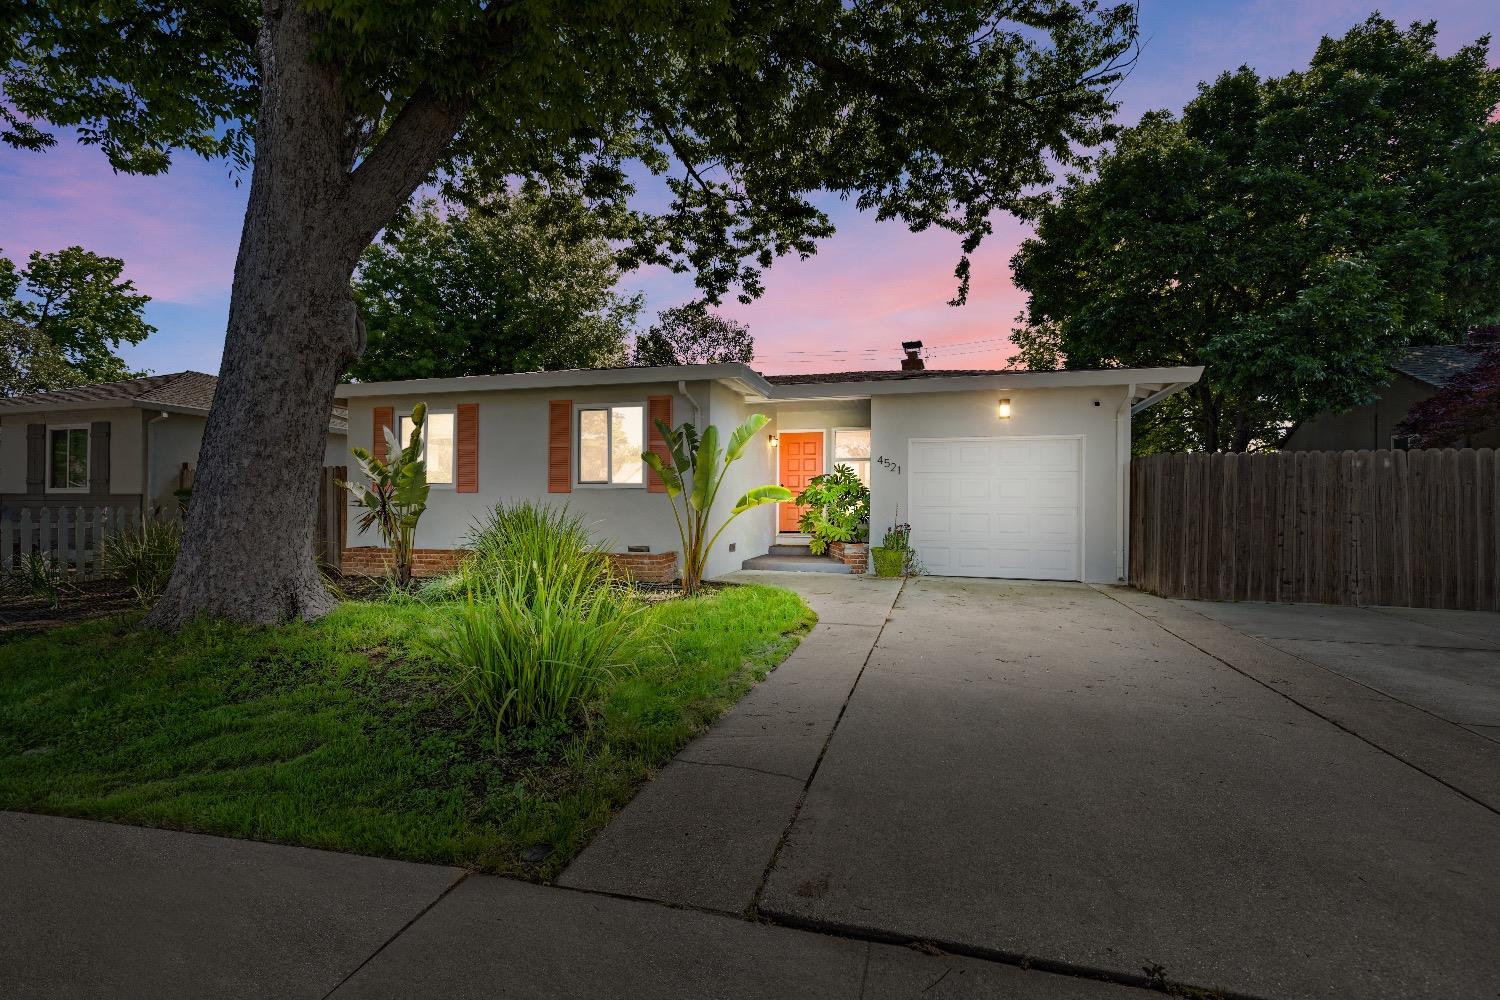 Introducing a delightful 3-bedroom, 1-bath home nestled in the charming Hollywood Park neighborhood 